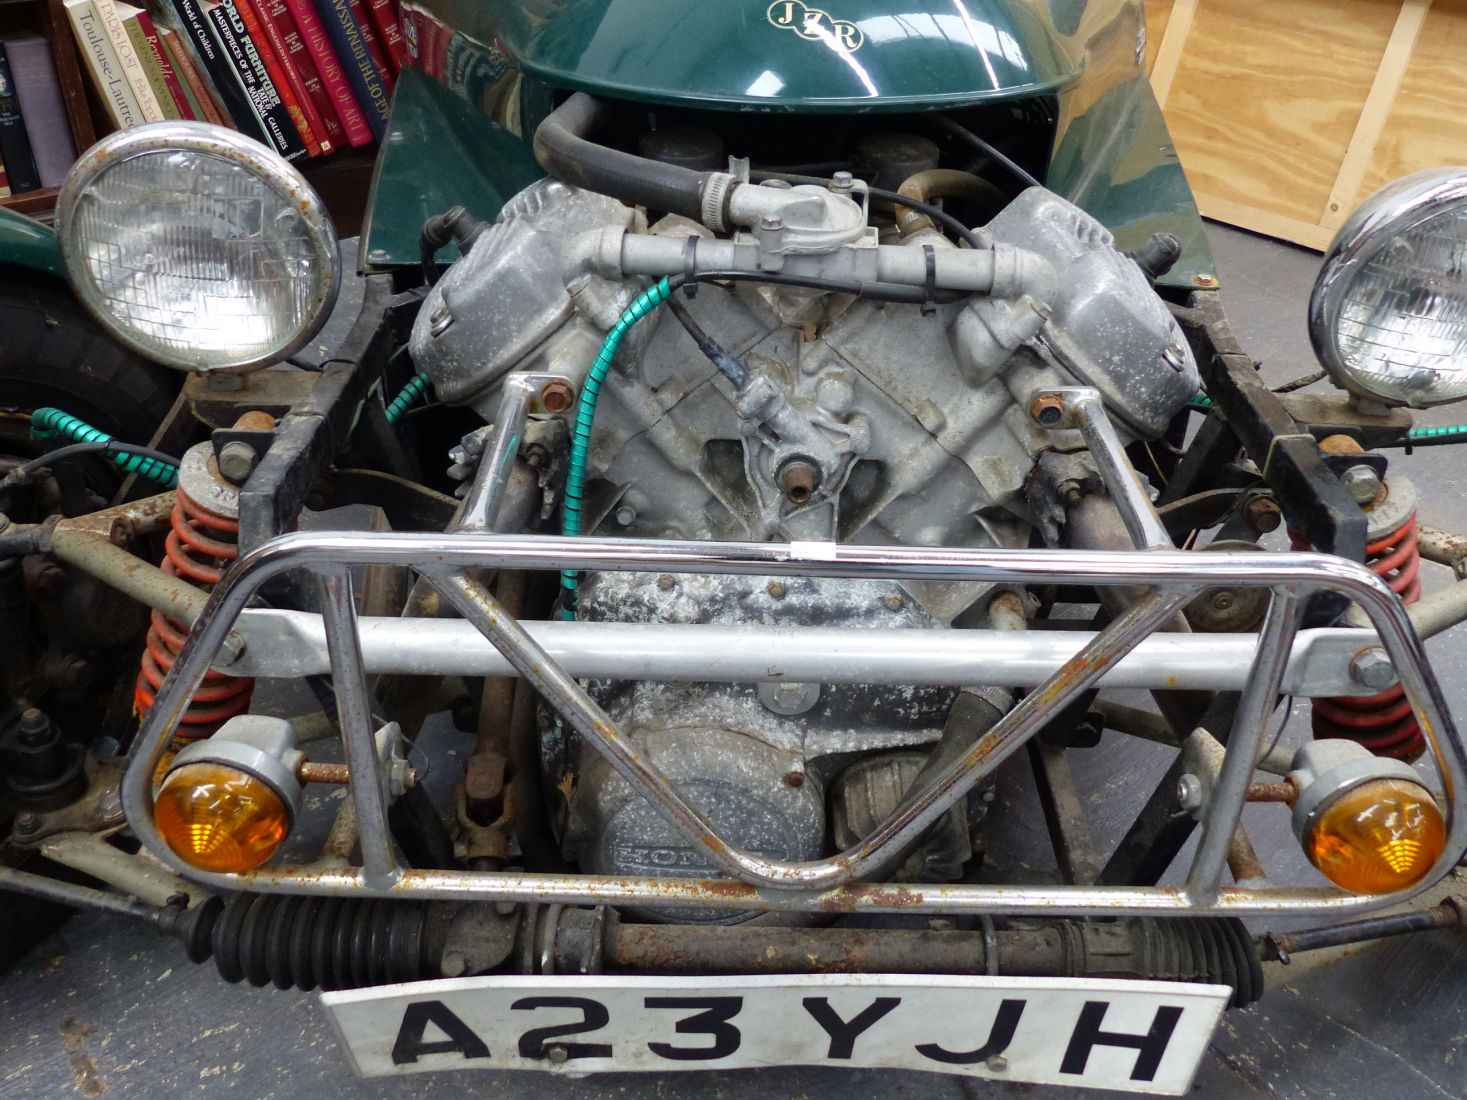 JZR /HONDA THREE WHEELER MORGAN DESIGN KIT CAR.-REGISTRATION NUMBER A23 YJH- FITTED WITH HONDA CX - Image 7 of 41